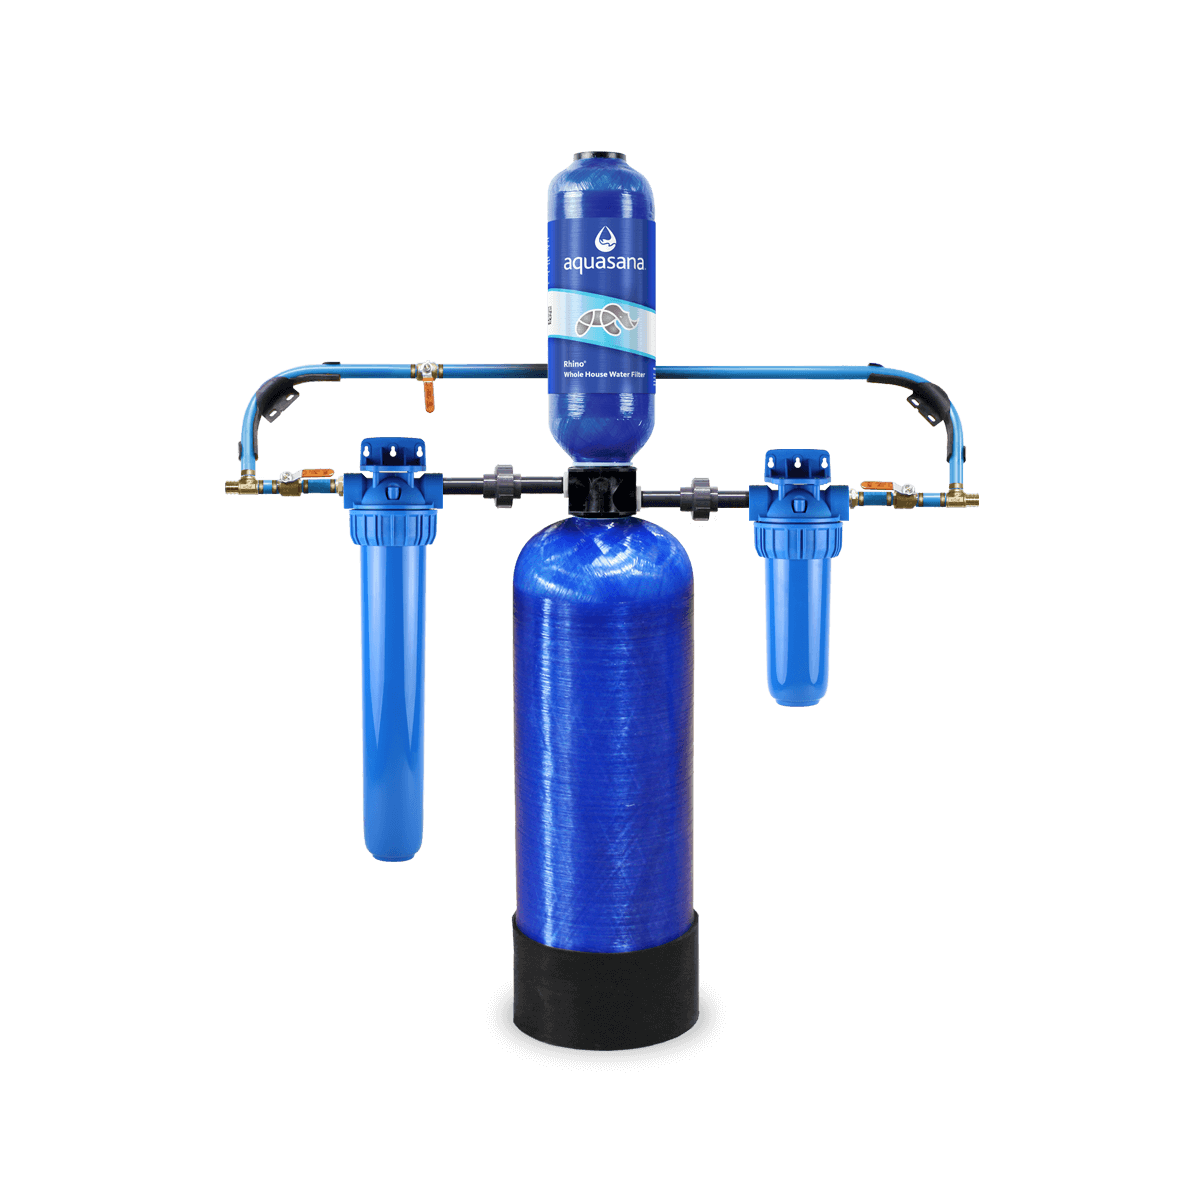 Rhino Whole House Water Filter System Home Water Filtration 4 Year/400,000 Gallons Aquasana